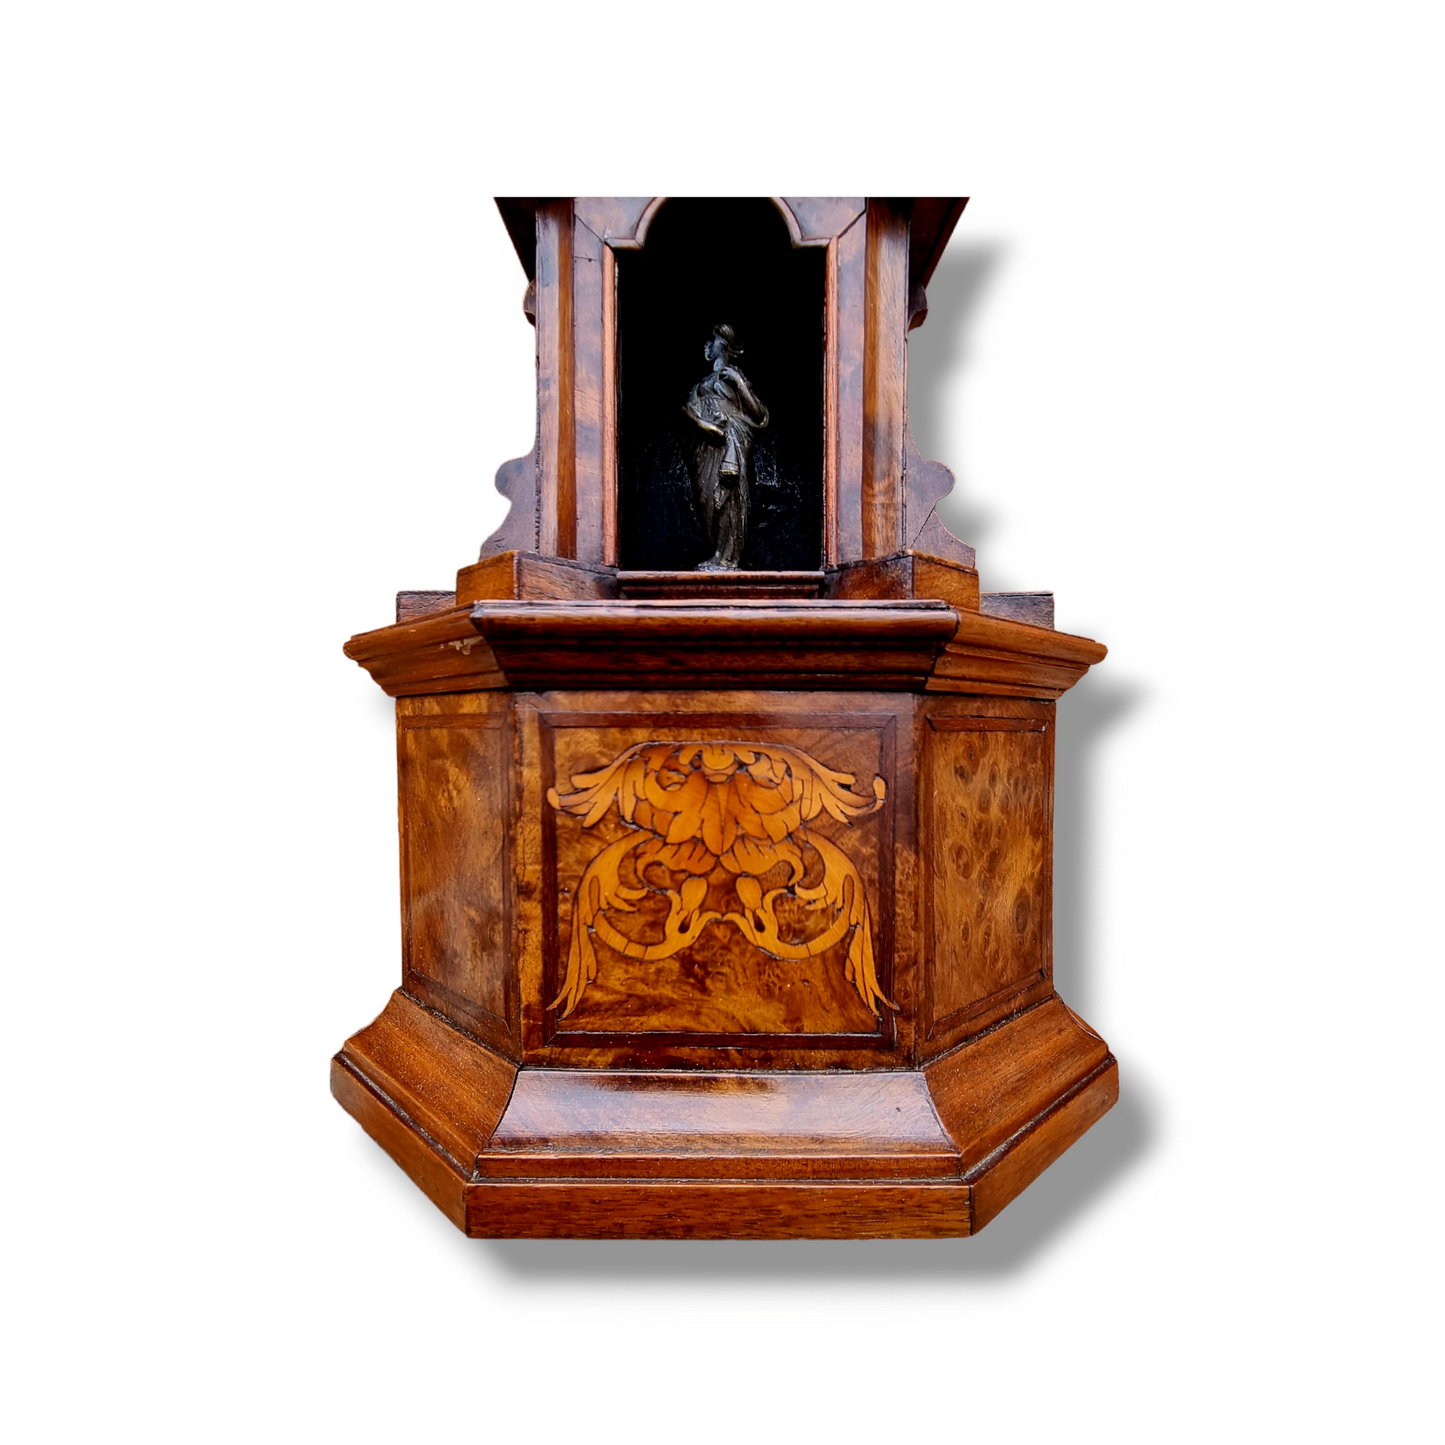 Grand Tour Interest - An 18th Century Italian Antique Walnut Architectural Model of a Roman Temple With a Classical Bronze Statue of Venus